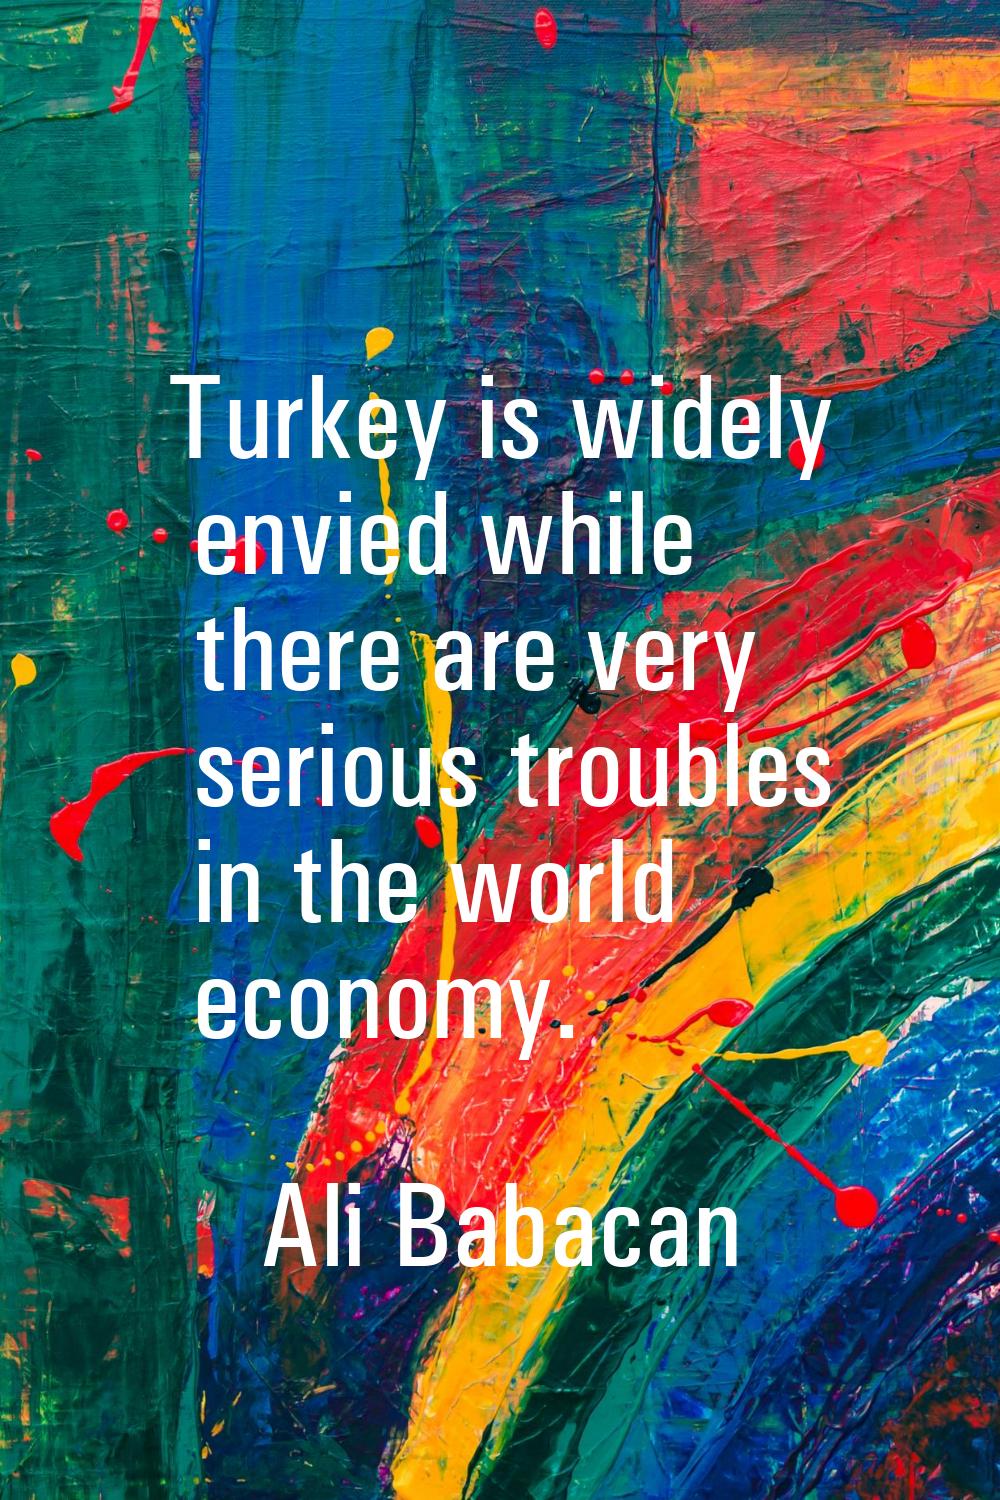 Turkey is widely envied while there are very serious troubles in the world economy.